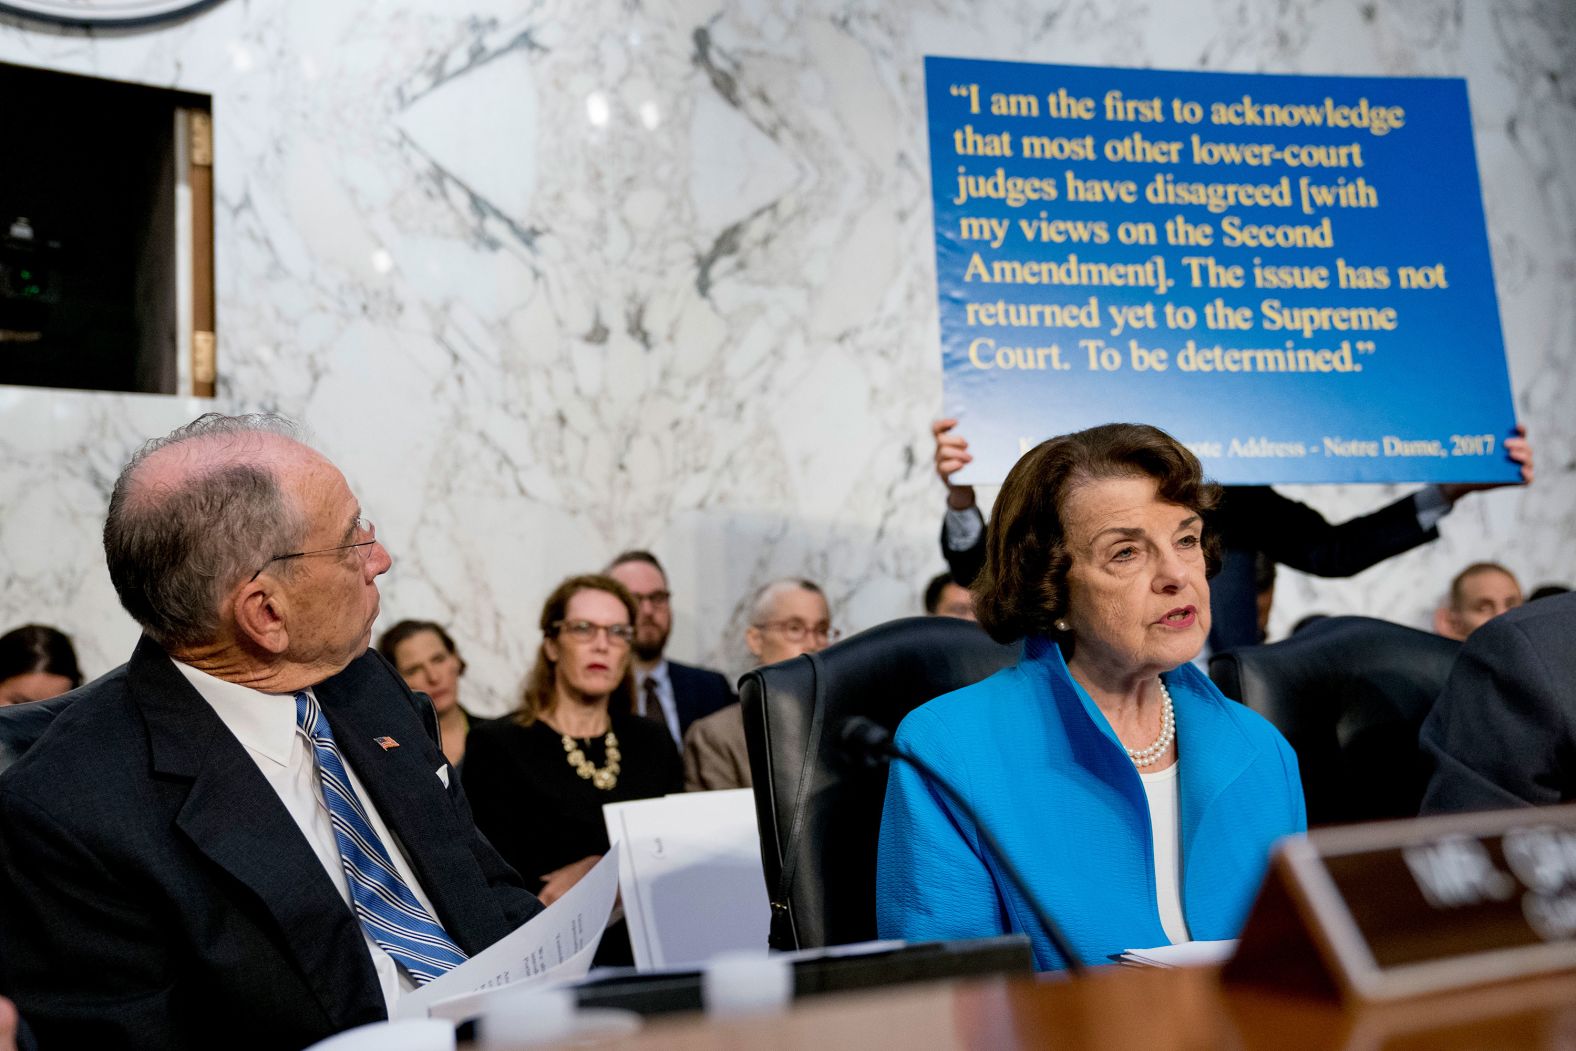 A poster on Wednesday shows a quote of Kavanaugh's from 2017. Sen. Dianne Feinstein, front right, <a href="index.php?page=&url=https%3A%2F%2Fwww.cnn.com%2Fpolitics%2Flive-news%2Fkavanaugh-hearing-dle%2Fh_71a89f195edbb405ce3fc4f2d93178ef" target="_blank">was questioning Kavanaugh's opinion on assault weapons,</a> specifically what he's said in the past about how "common use" dictates the rights of Americans to own and continue to use them. Kavanaugh said he follows Supreme Court precedents on the issue specifically as they relate to the Second Amendment, though he said that doesn't mean "that there is no gun regulation permissible."